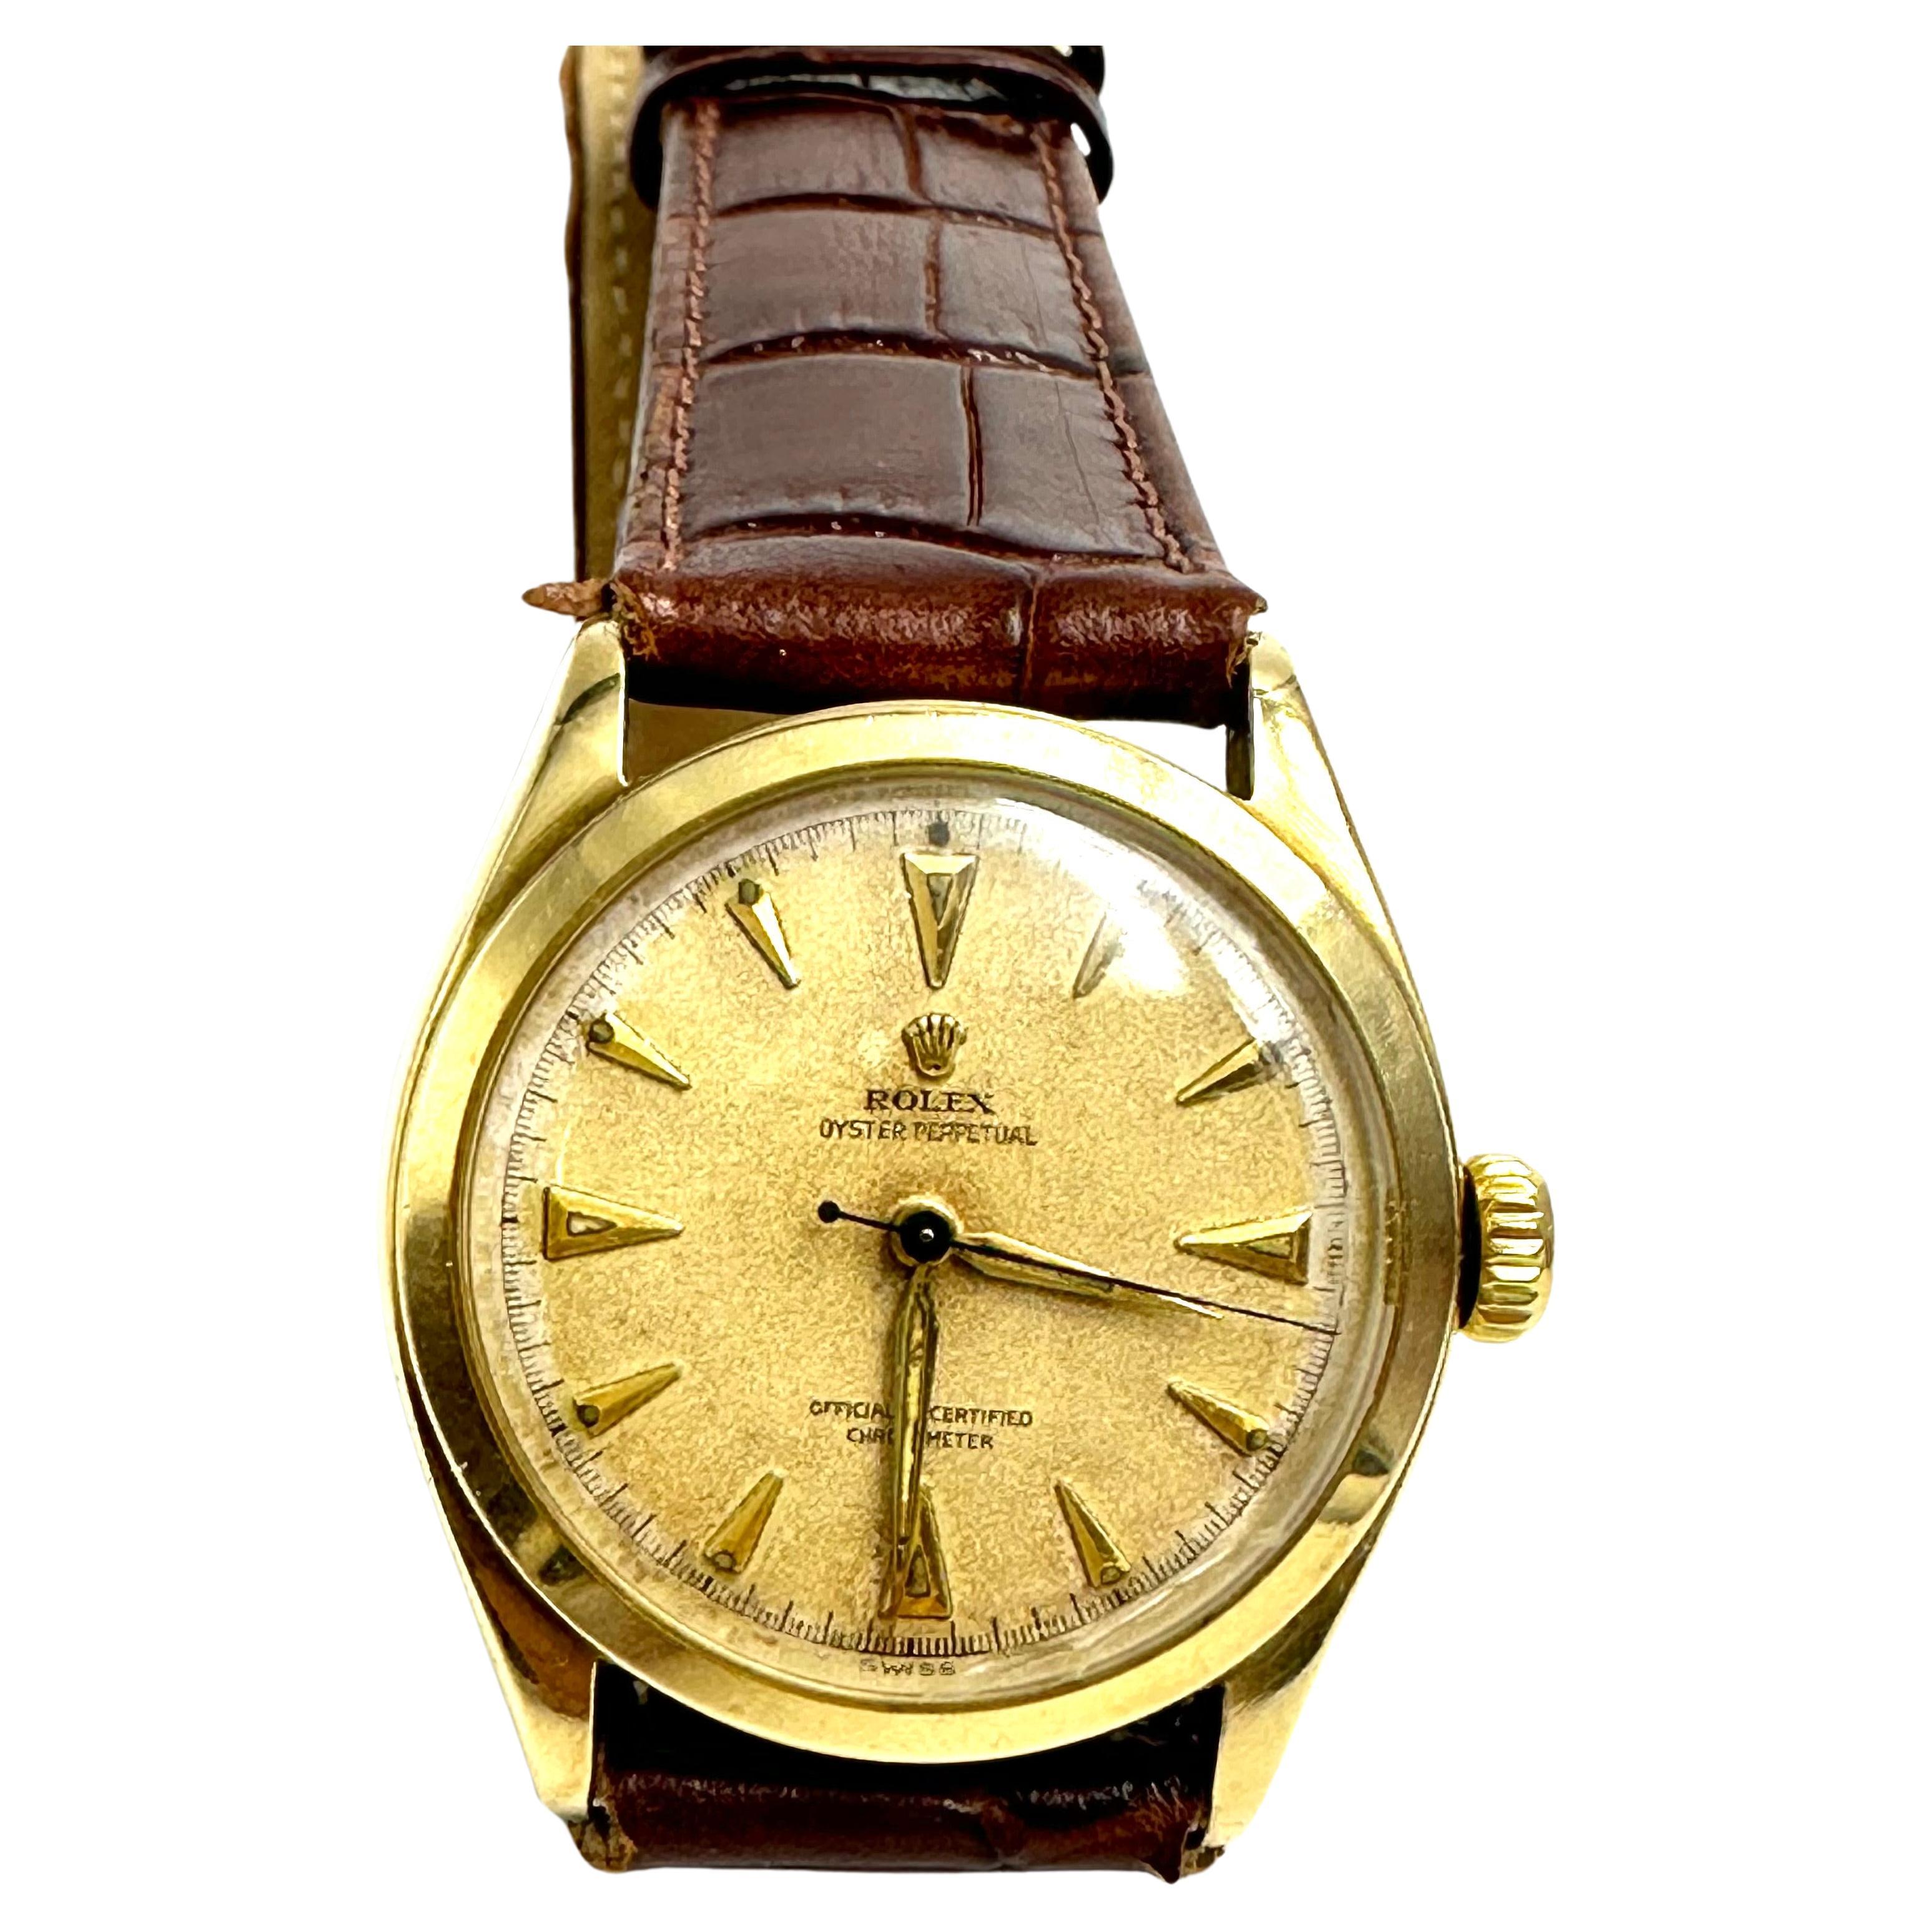 Rolex Oyster Perpetual, Ref 6084, 14K gold case For Sale